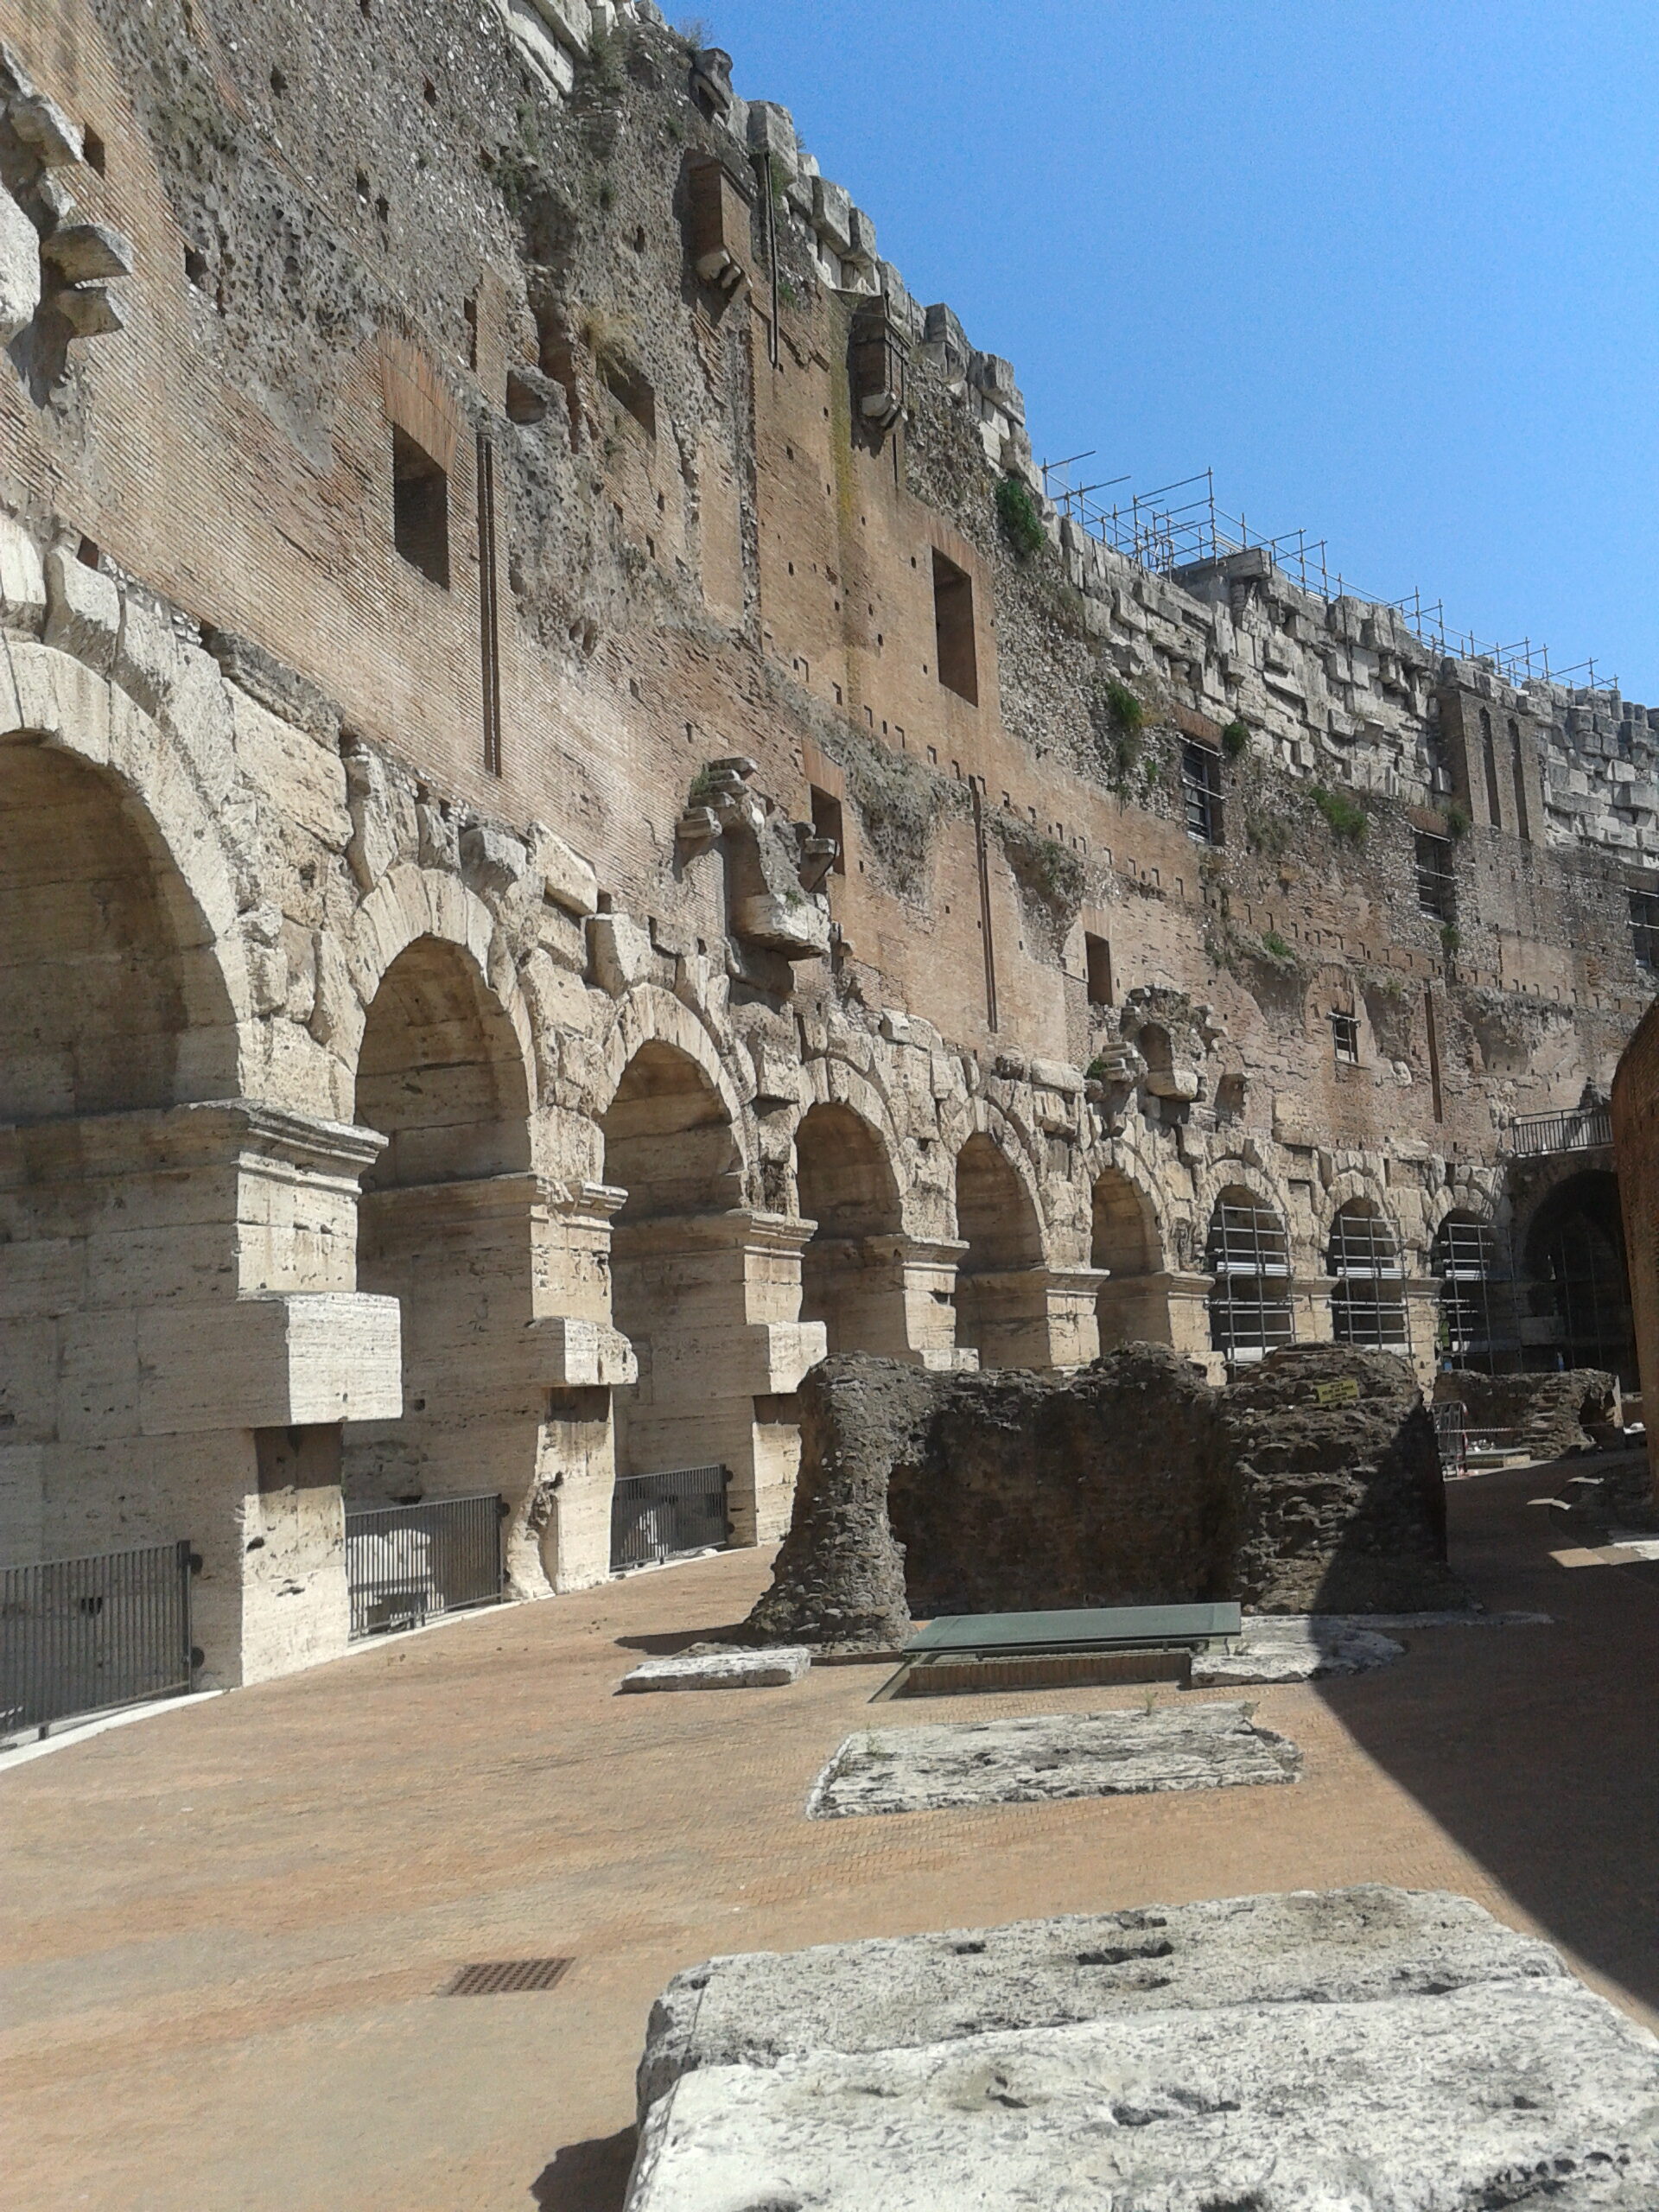 The Colosseum, from inside